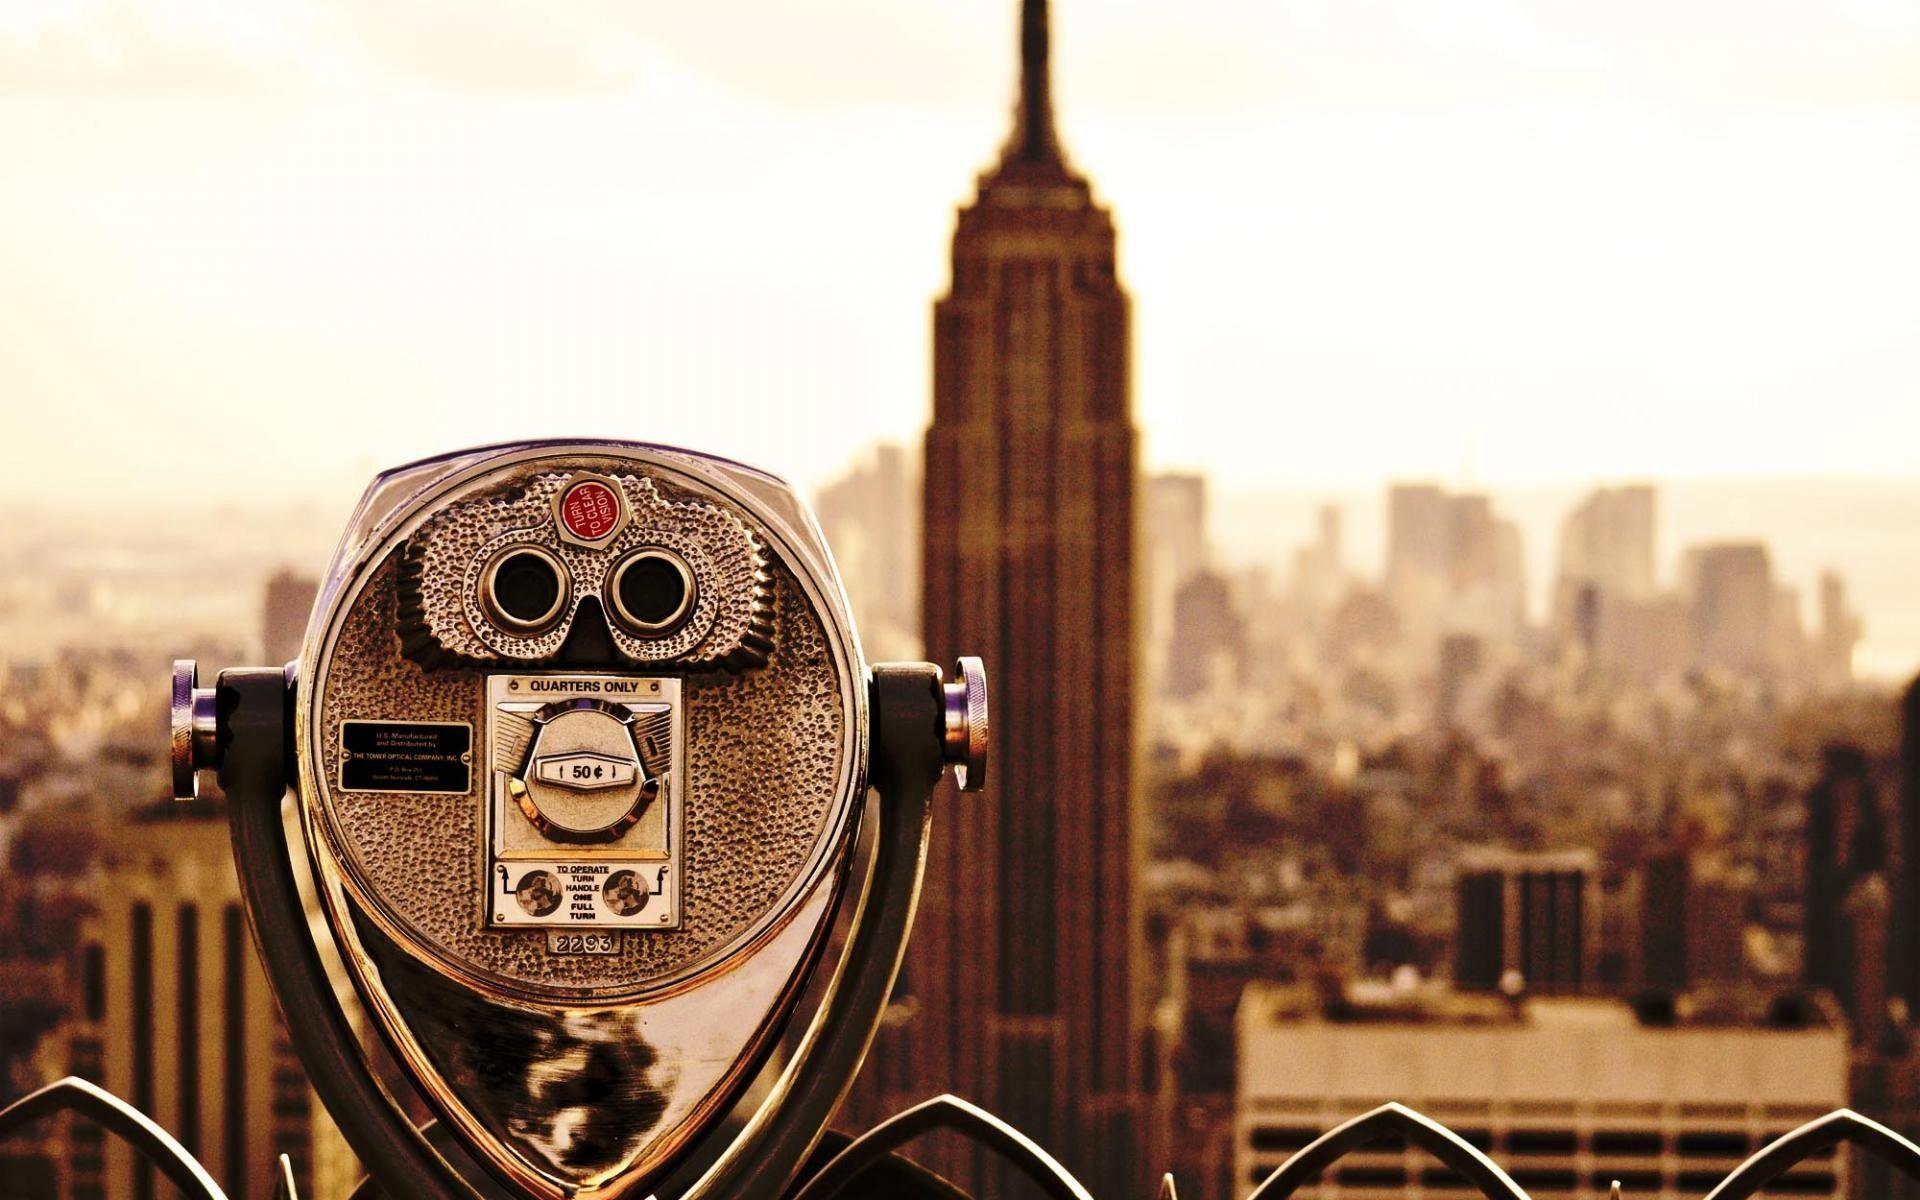 Cityscapes new york city empire state building wallpaper